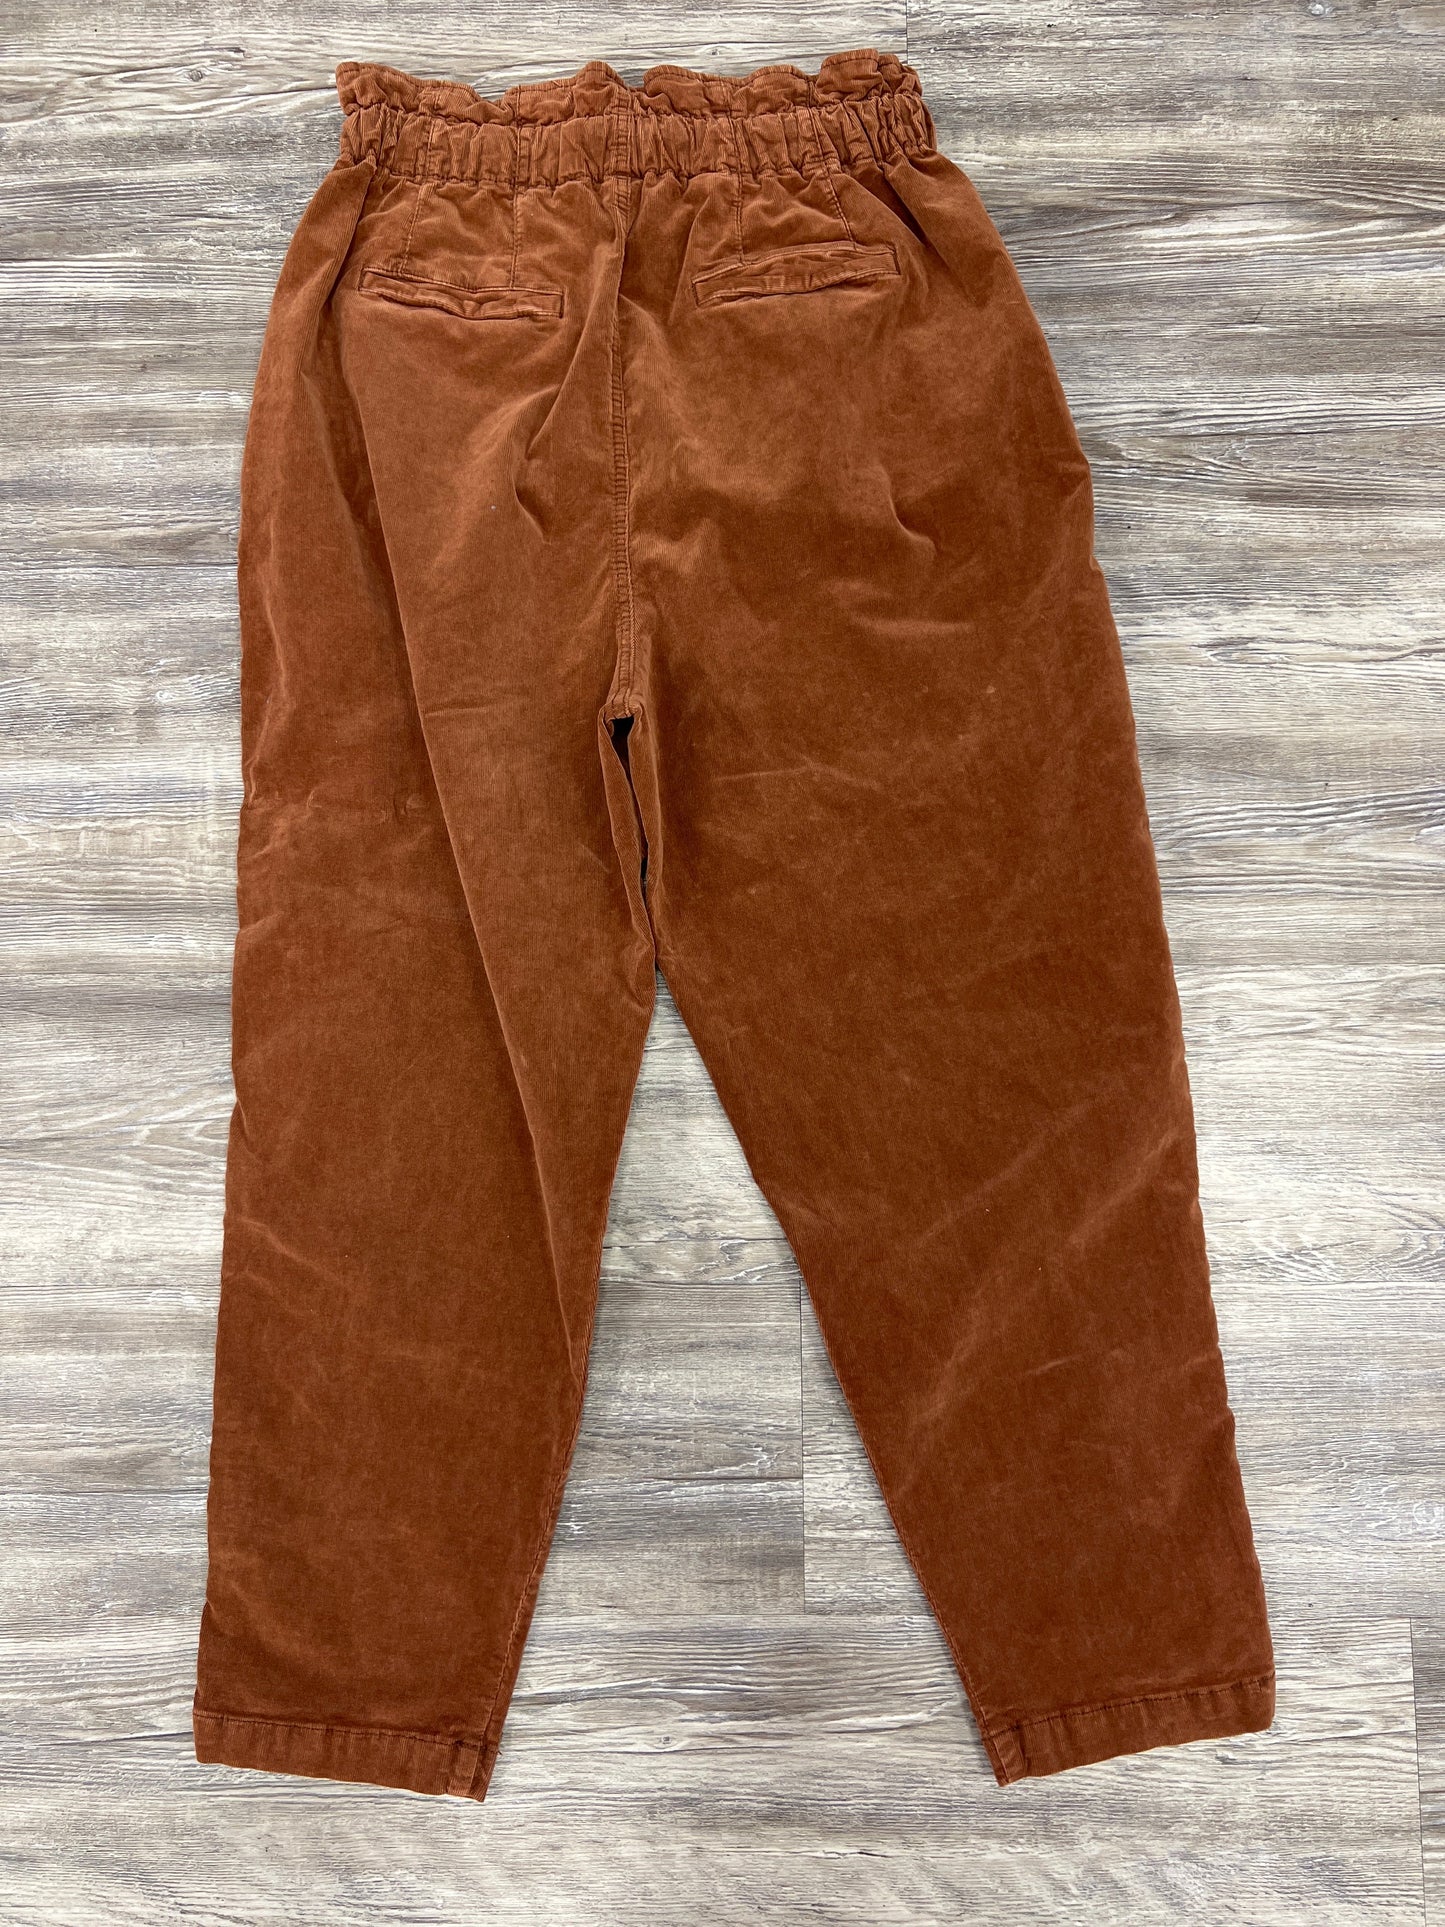 Pants Corduroy By Free People Size: 4